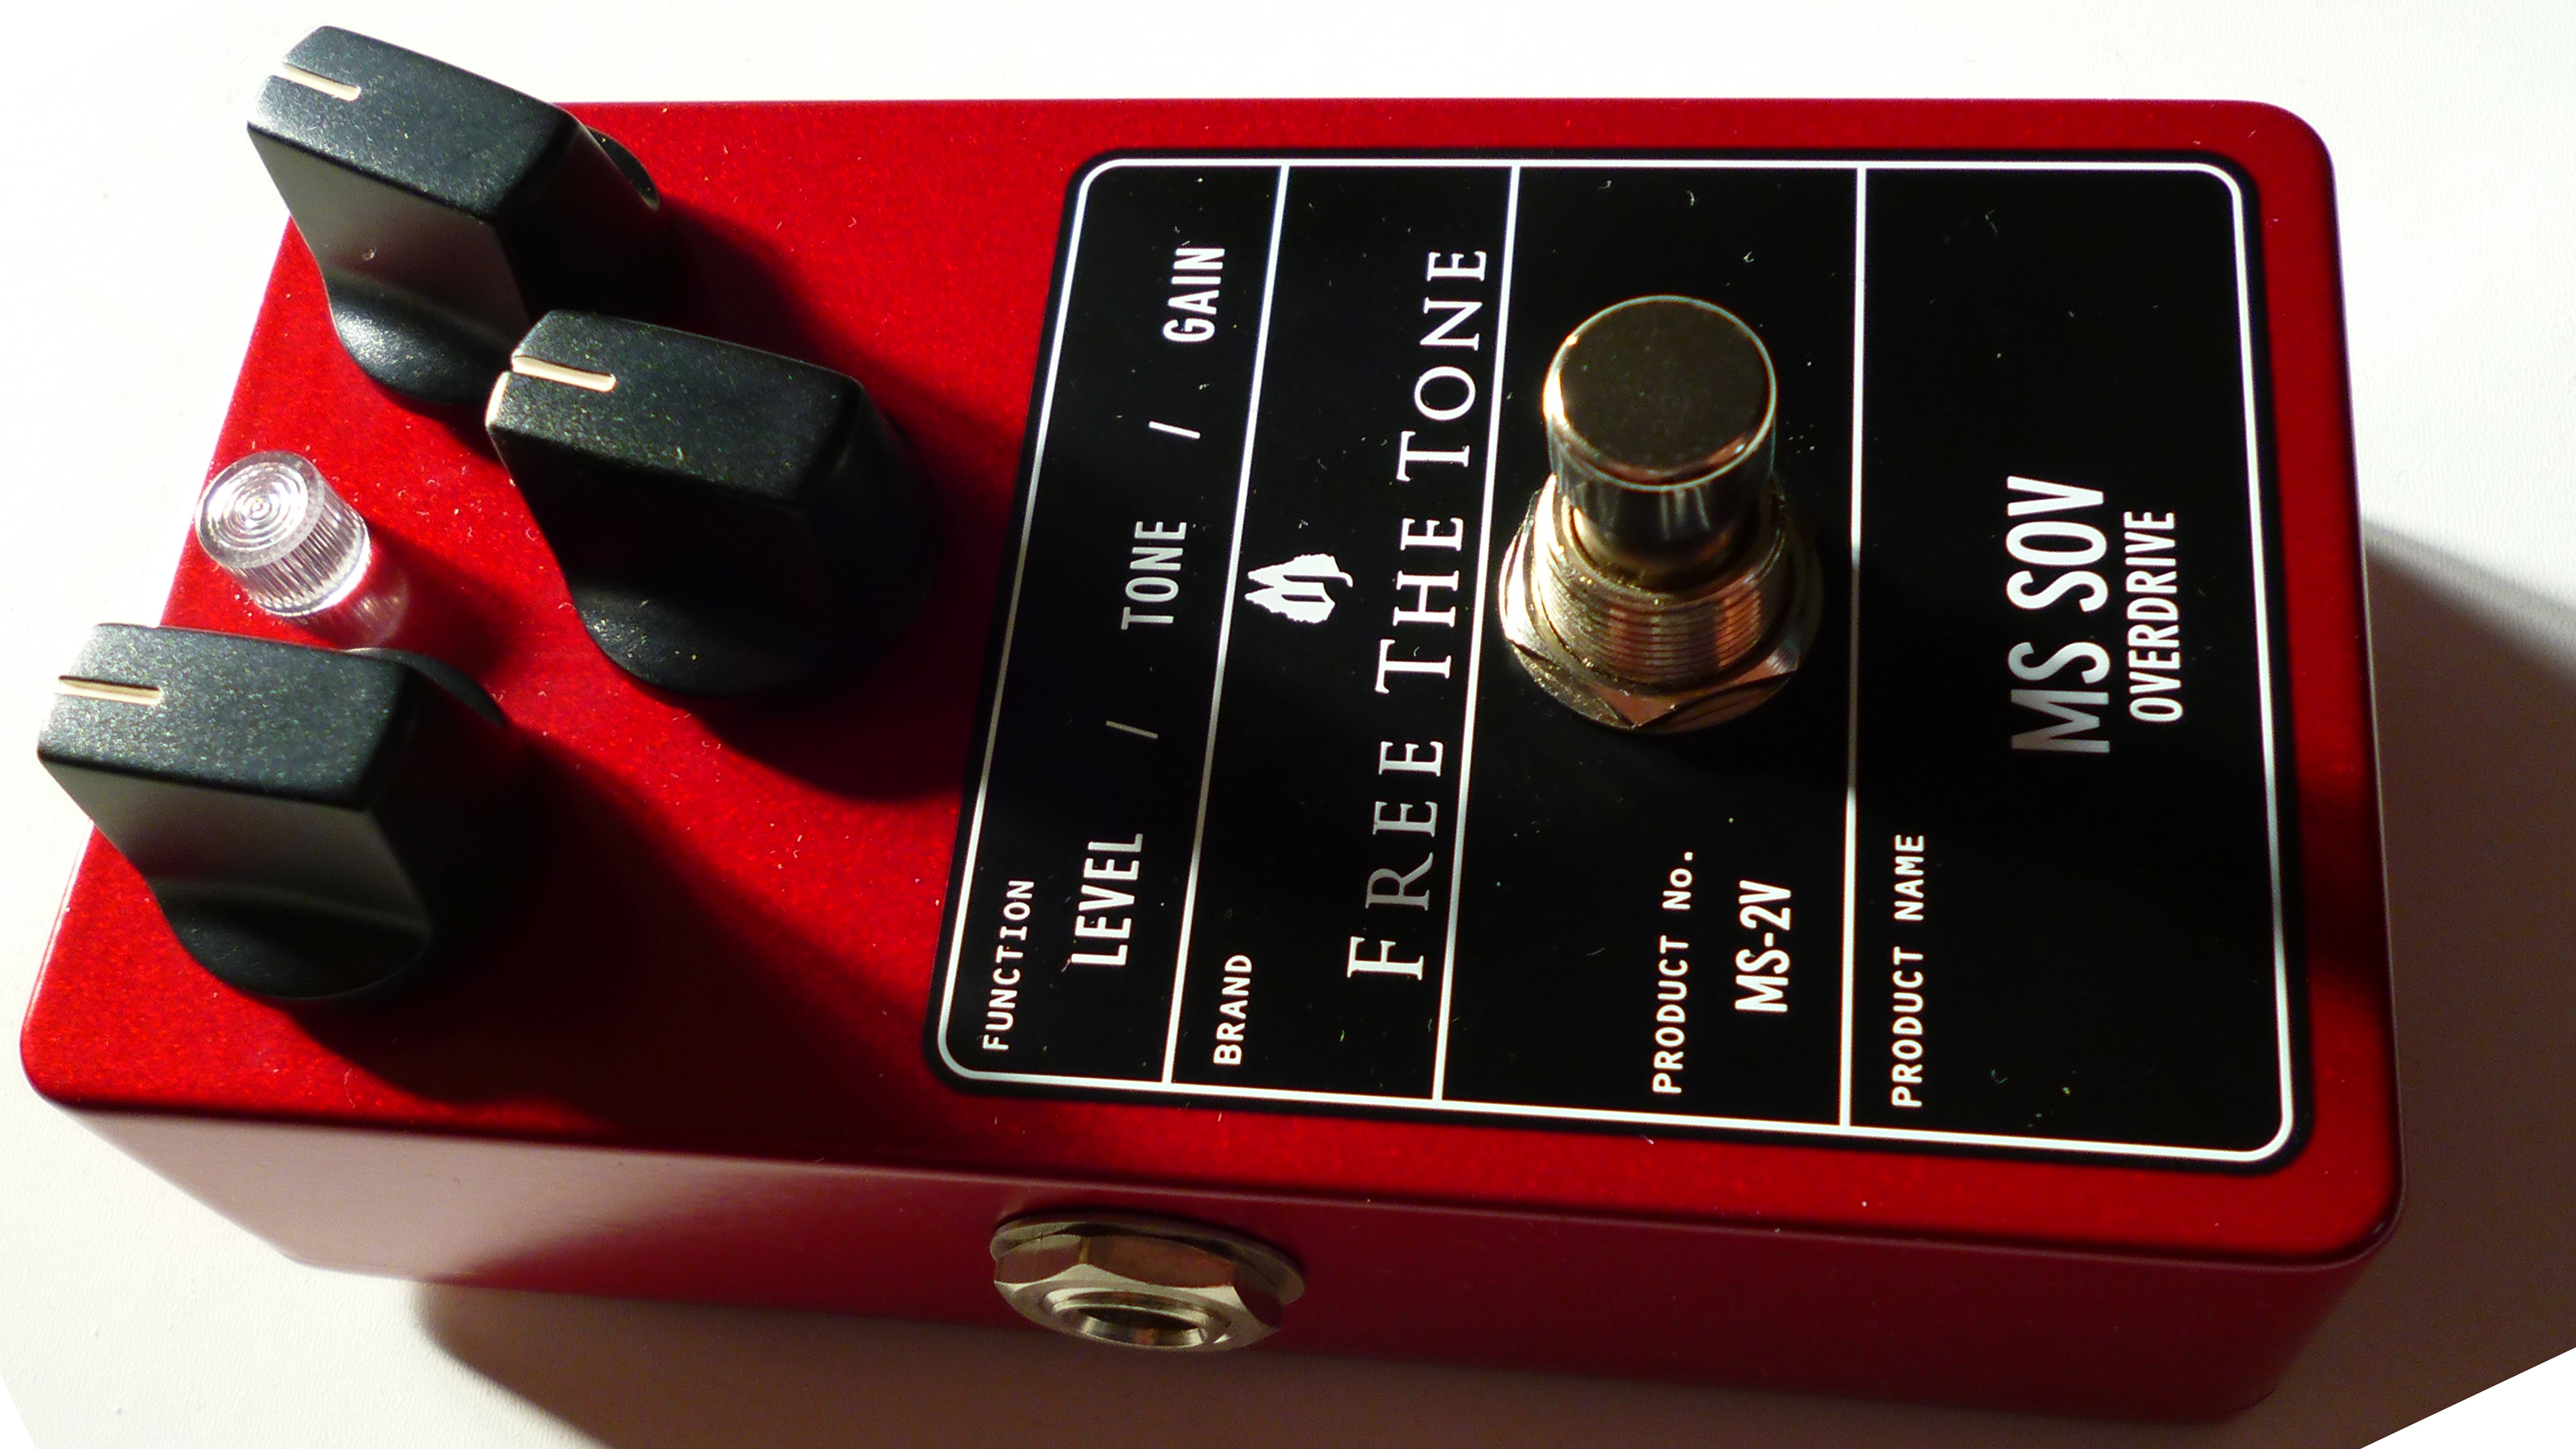 Free The Tone MS SOV overdrive pedal revealed | MusicRadar